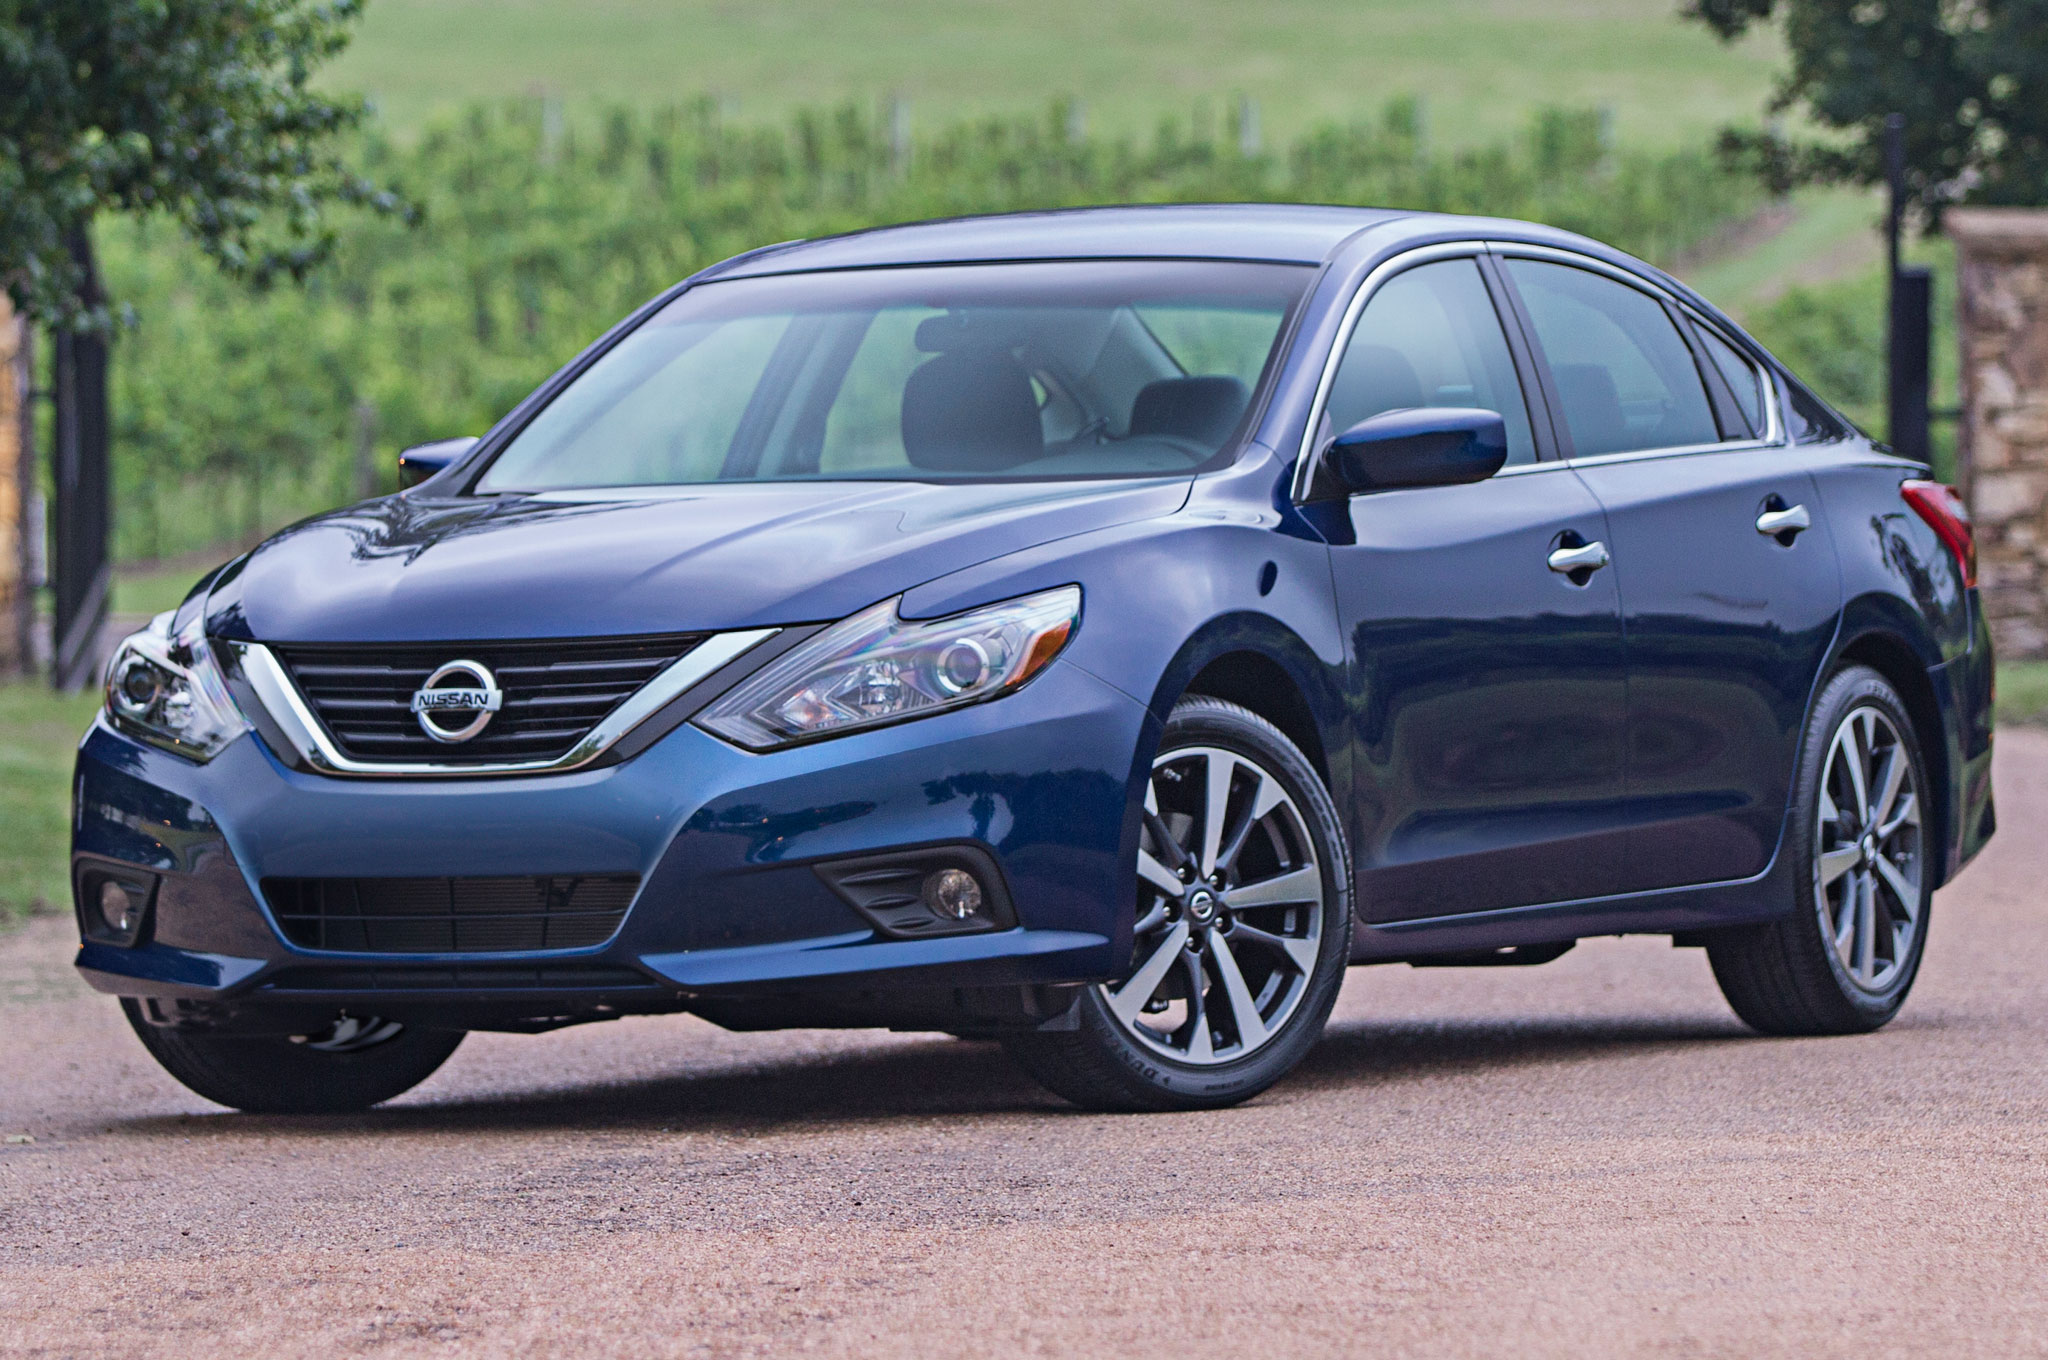 2048x1360 > Nissan Altima Wallpapers